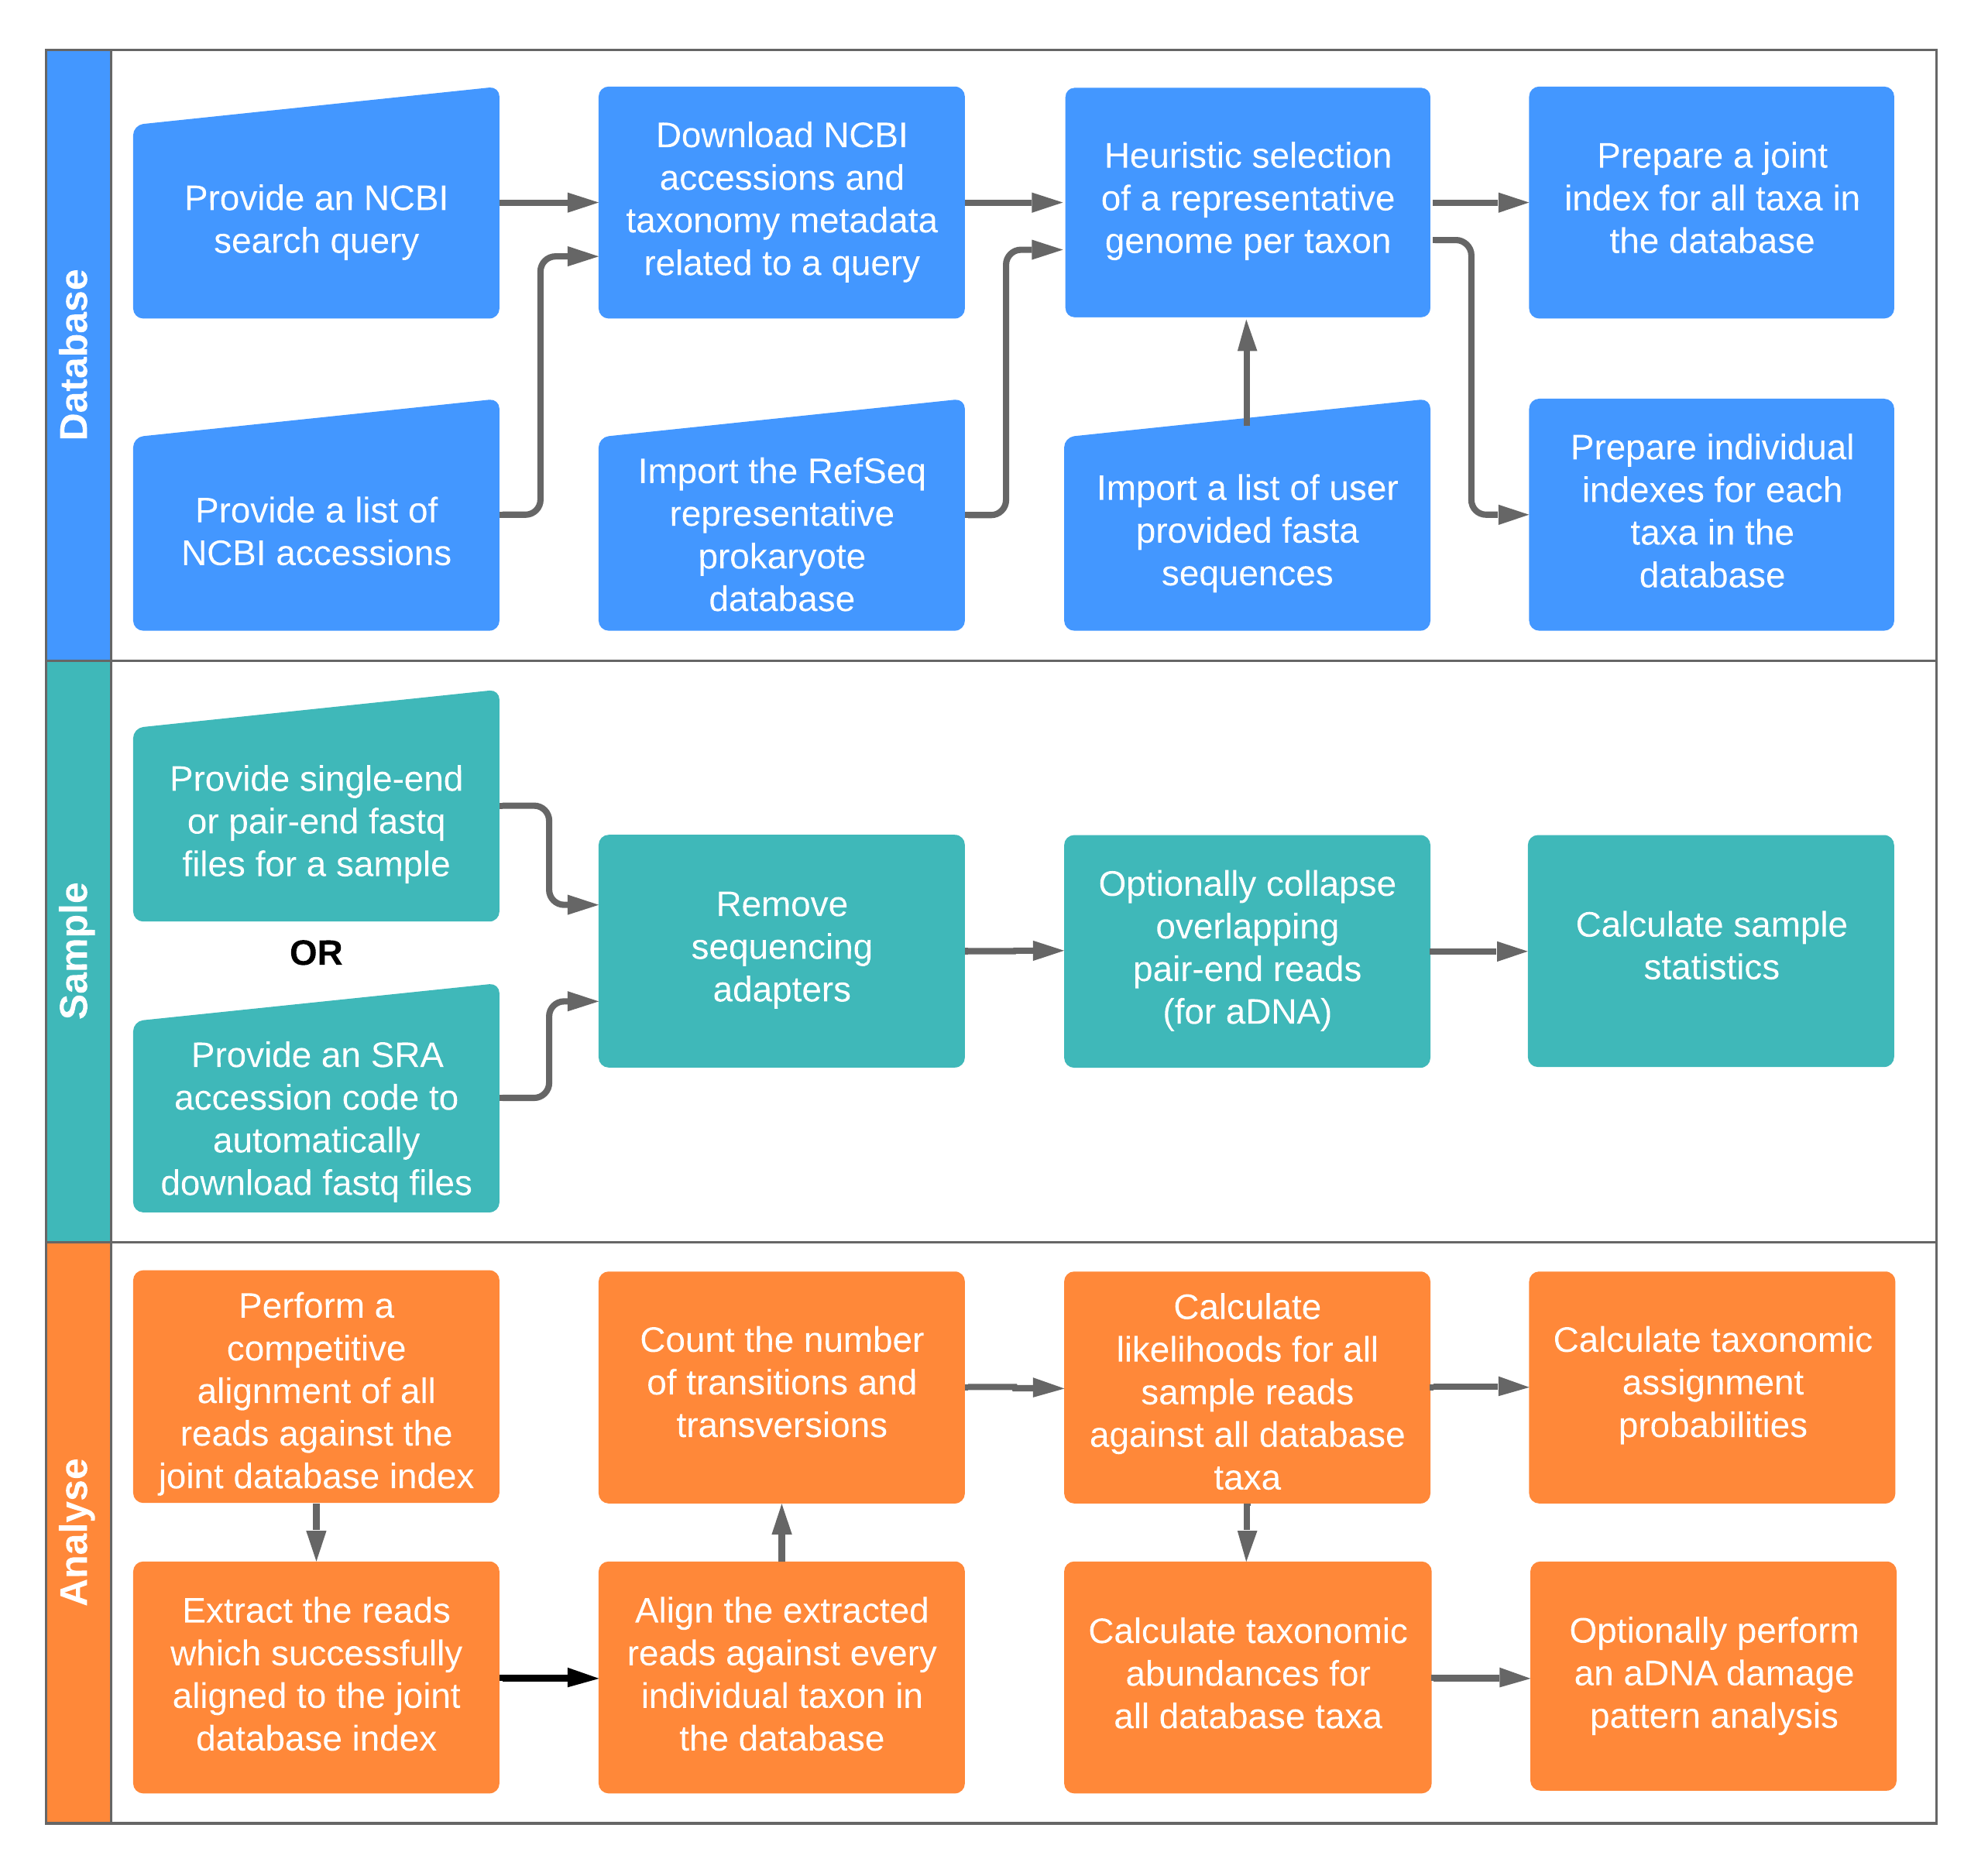 _images/workflow_chart.png